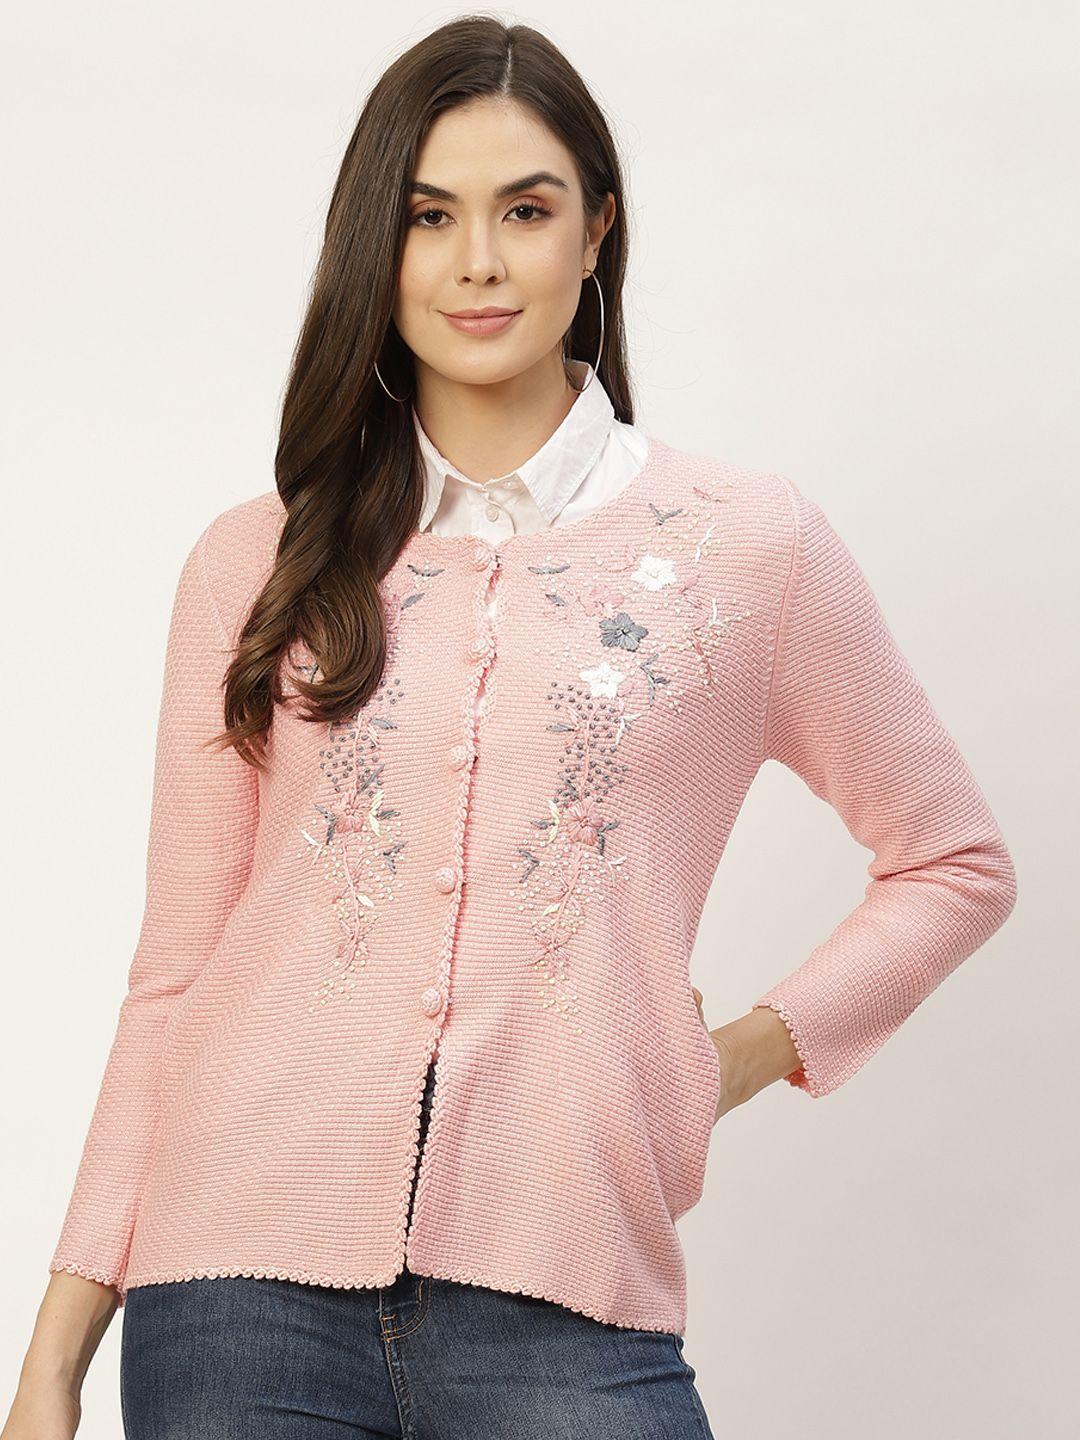 APSLEY Women Pink & White Floral Embroidered Cardigan with Embellished Detail